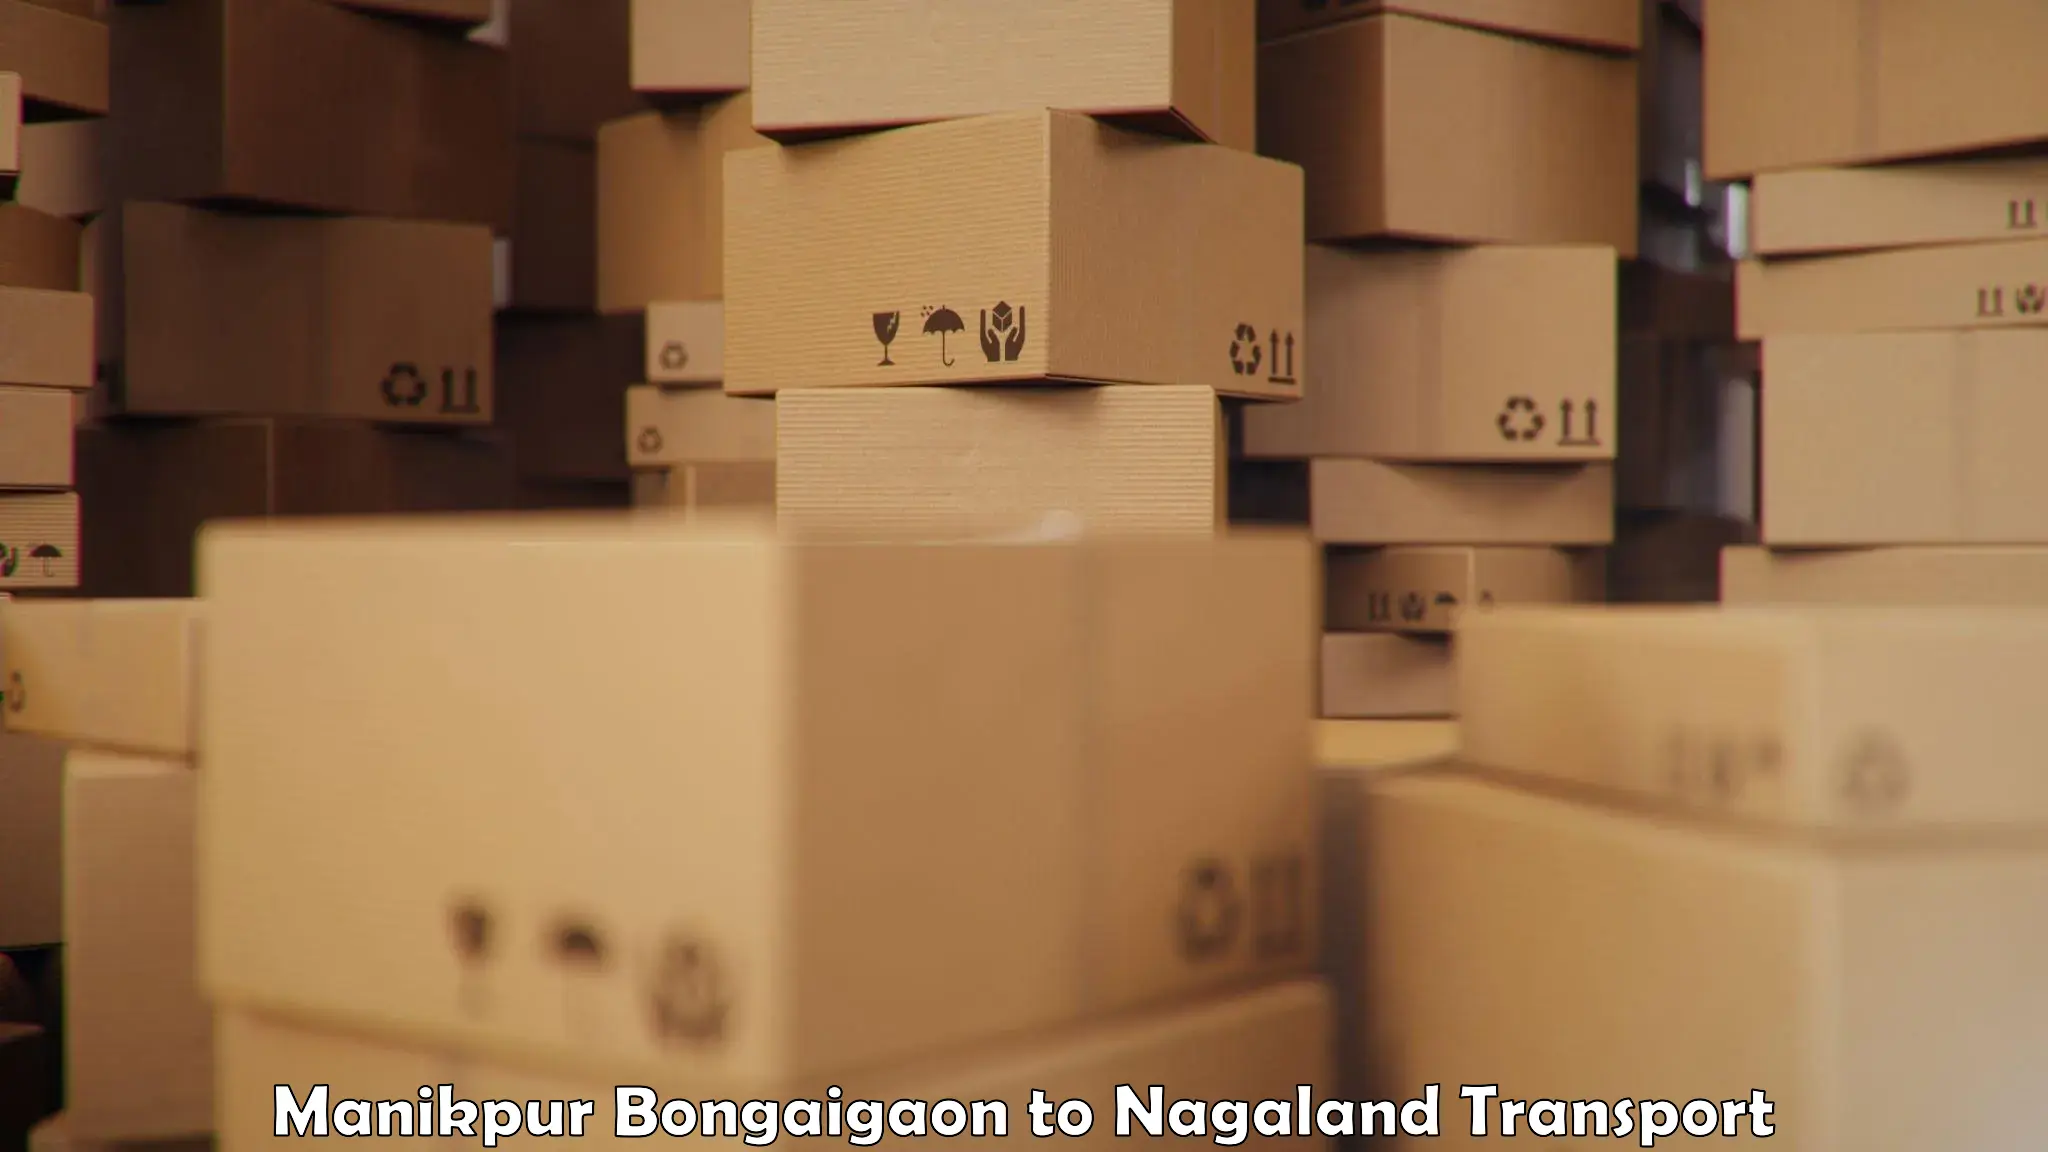 Package delivery services Manikpur Bongaigaon to Mokokchung